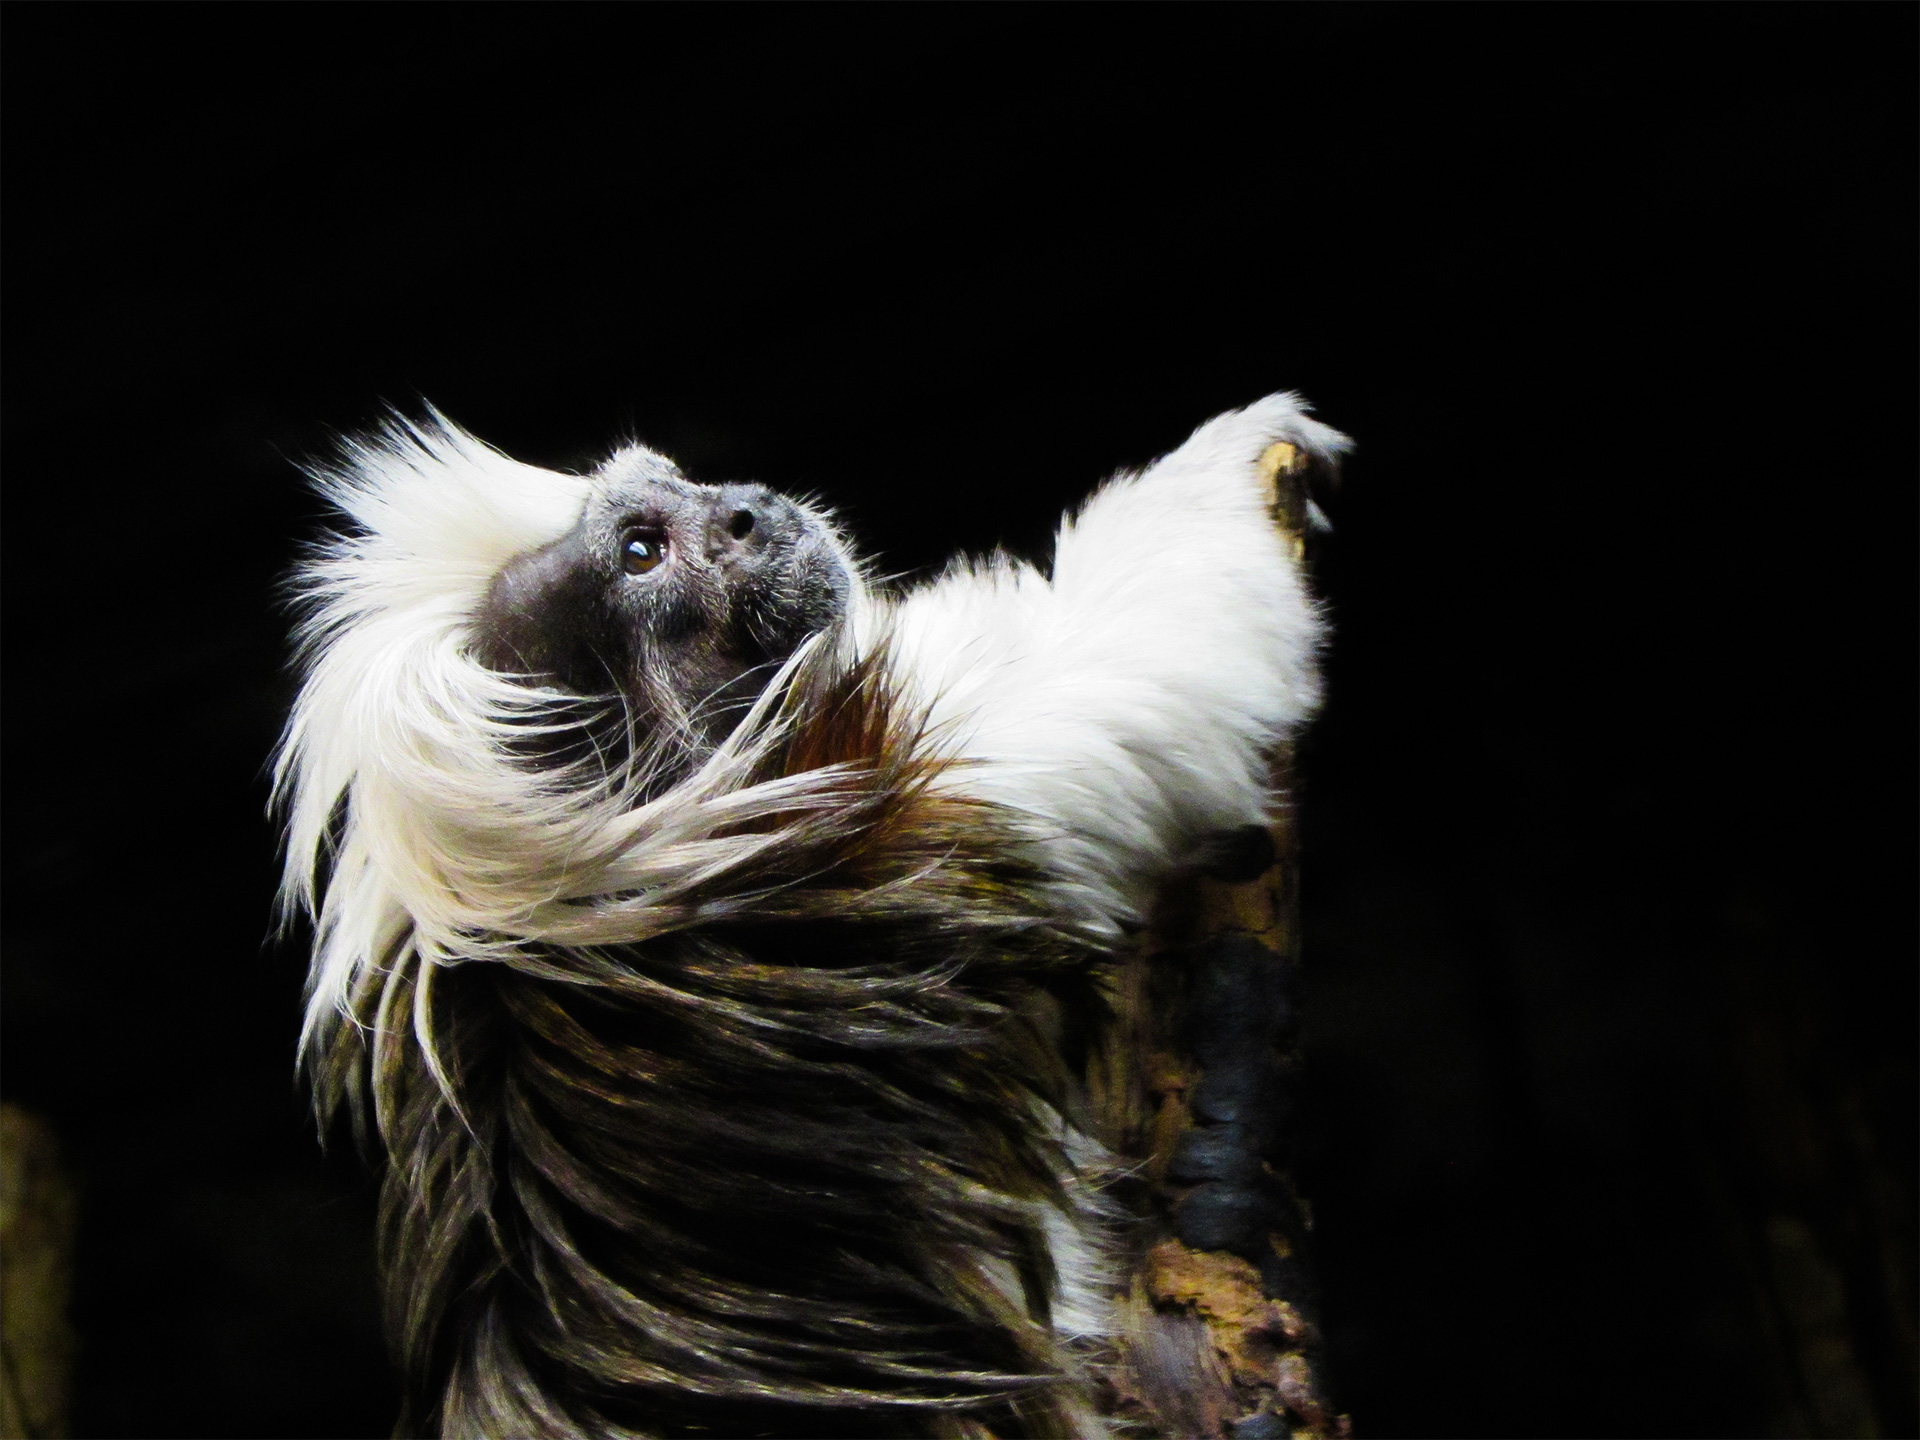 A dramatic image of a tamarin monkey gazing up against a black background